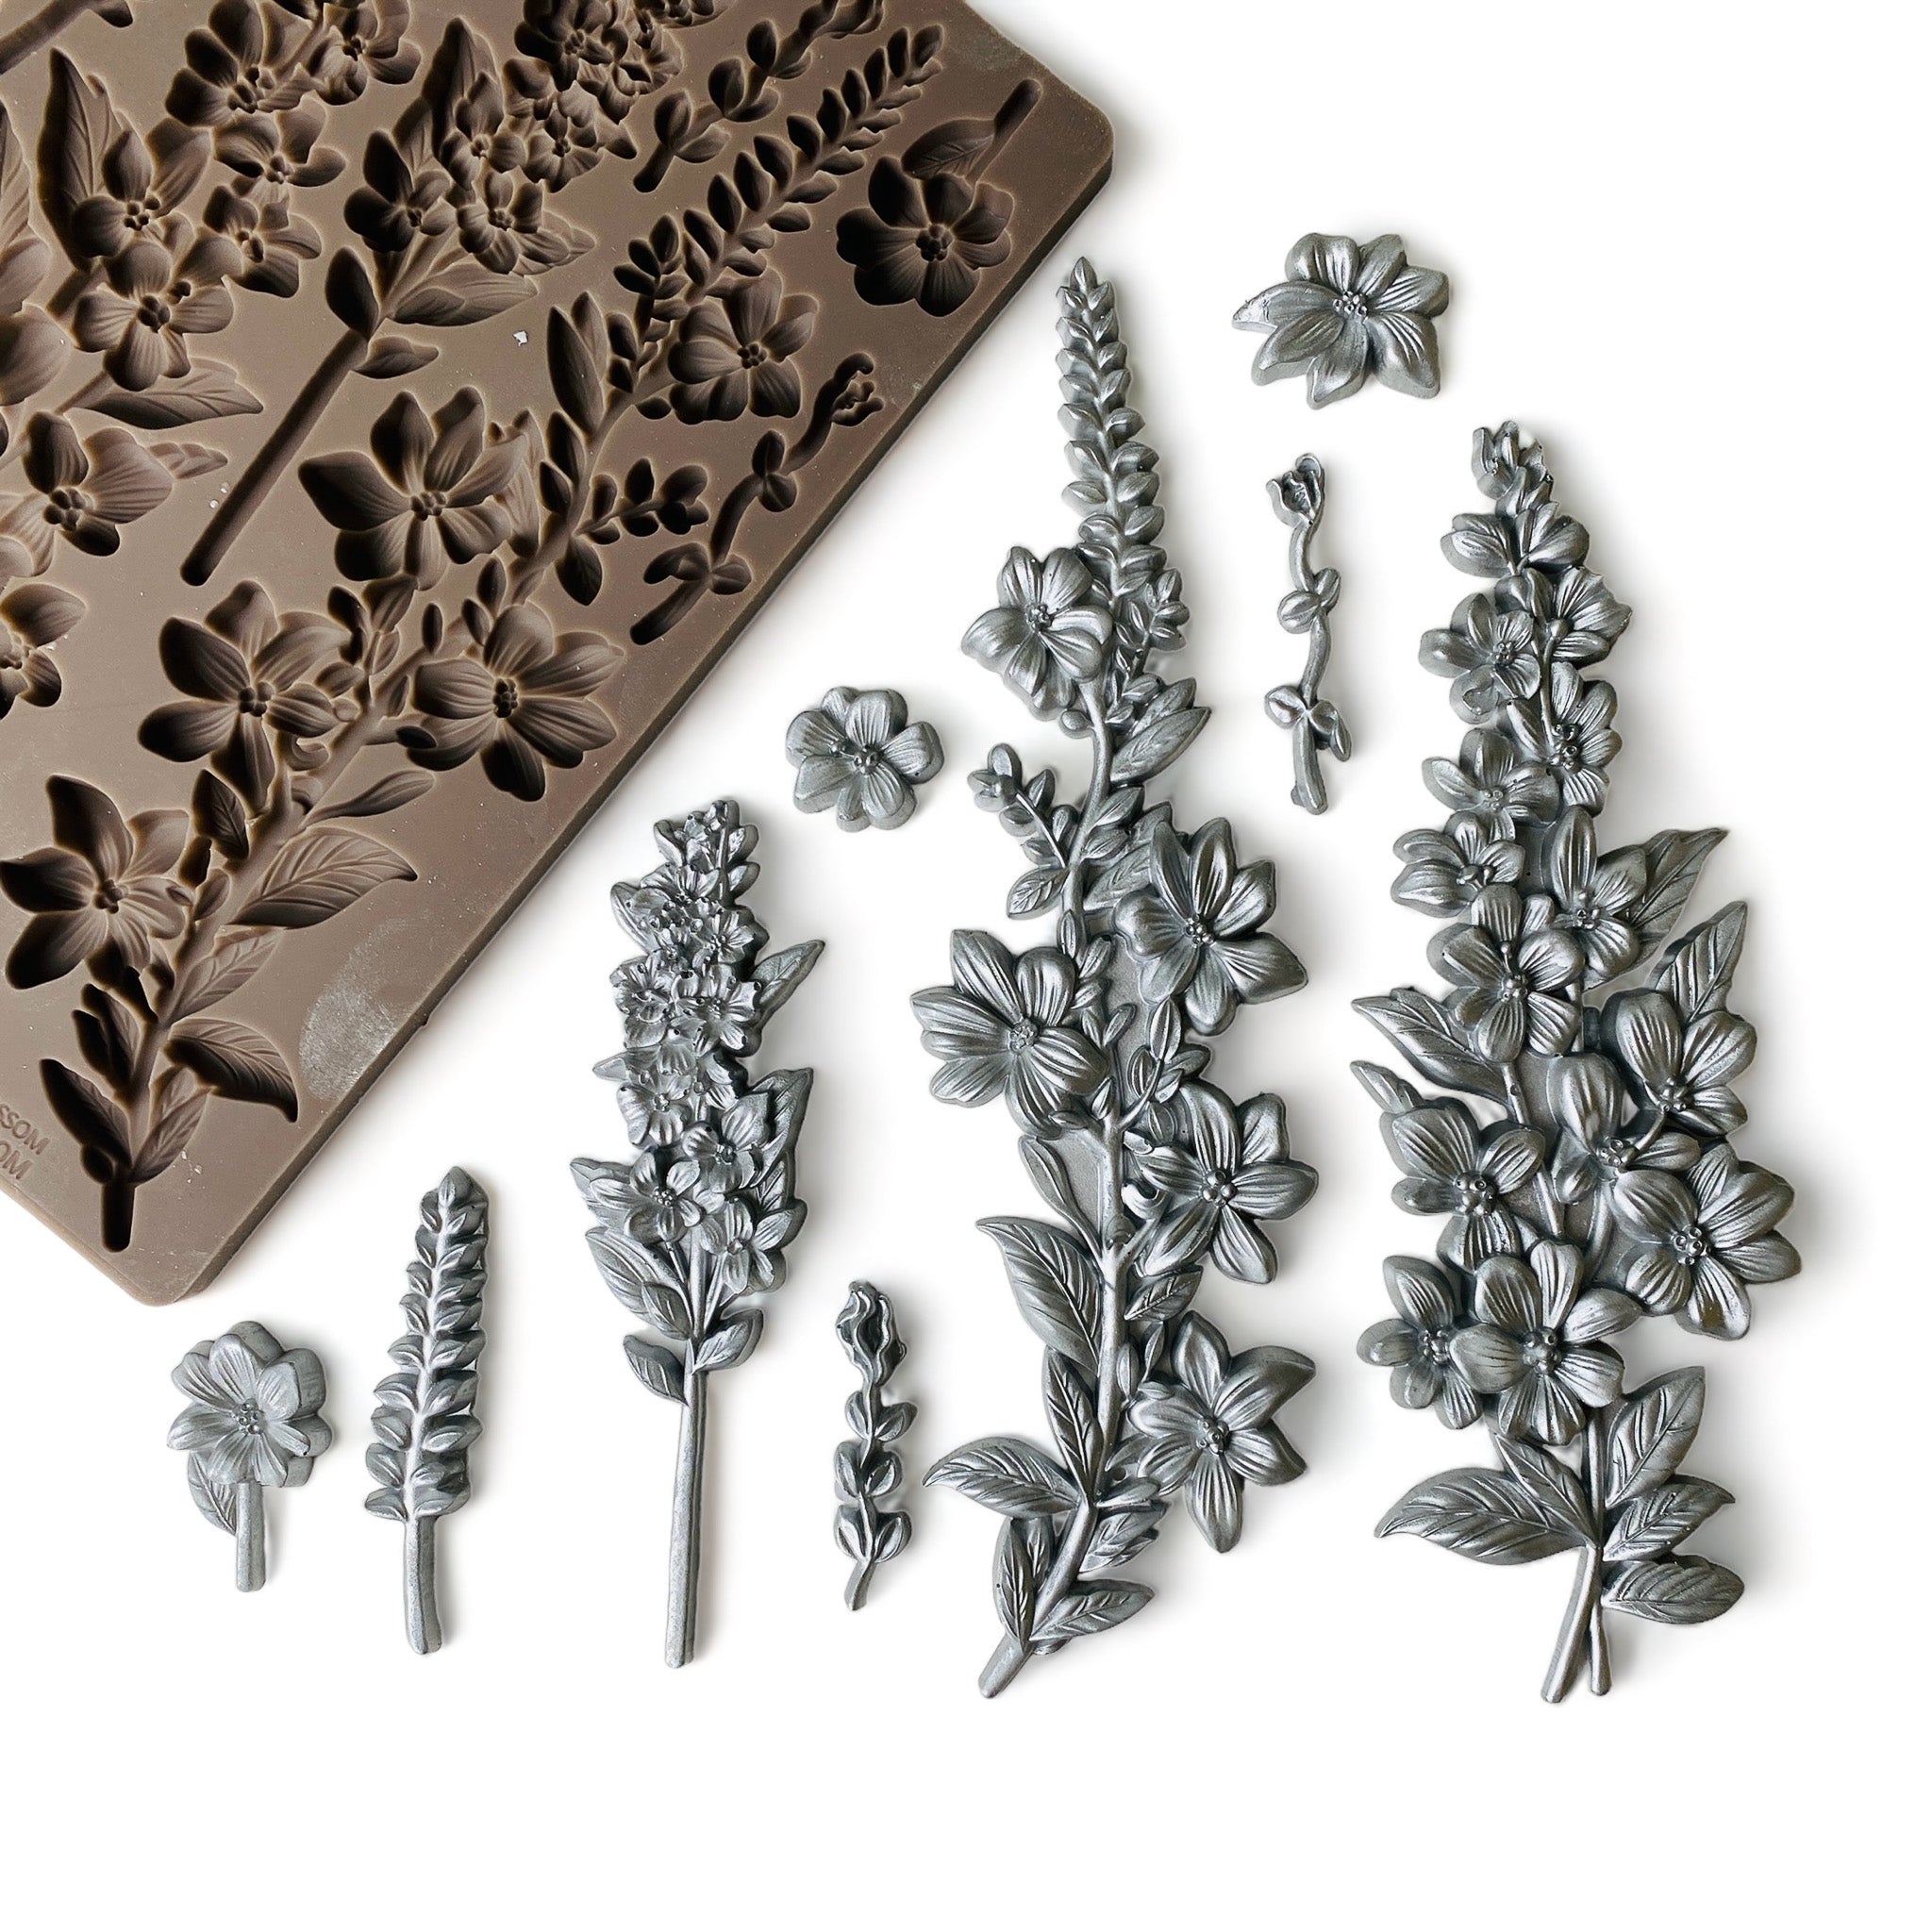 A brown silicone mold and silver-colored castings that feature petite flower clusters are against a white background.